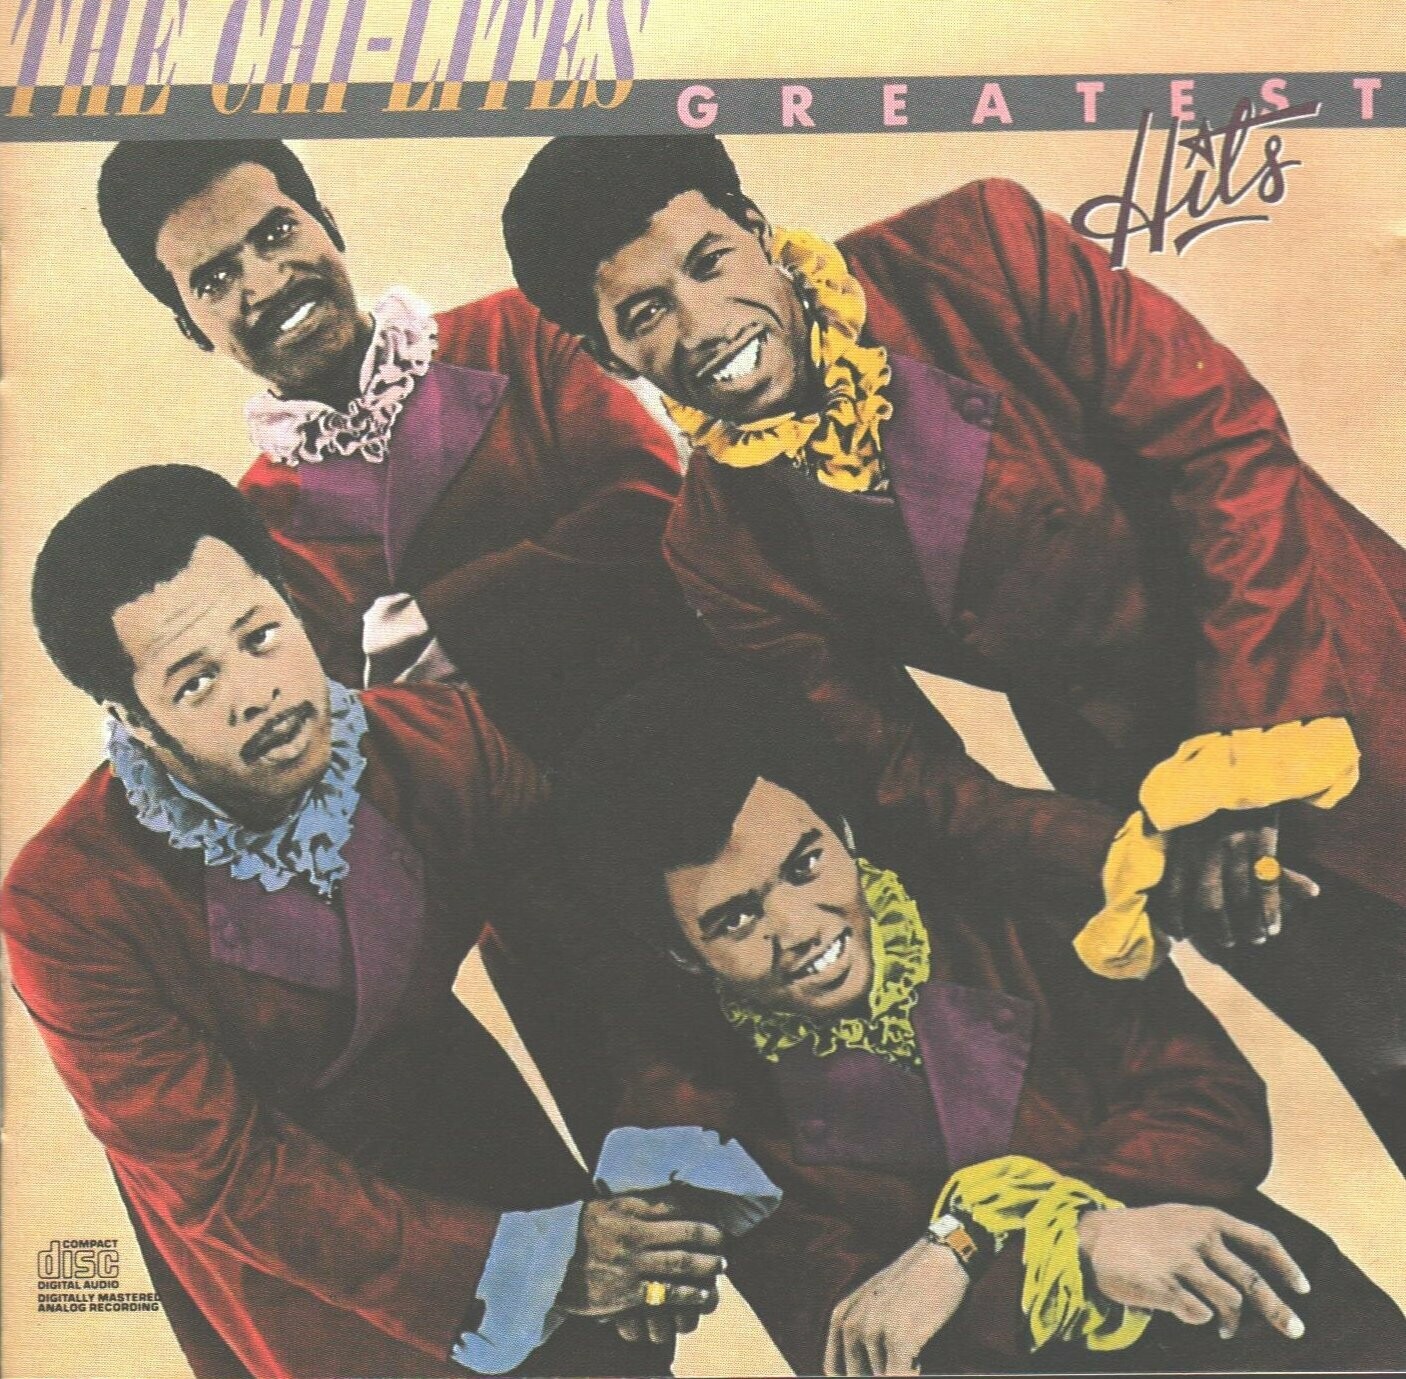 The Chi-Lites "Greatest Hits" EX+ 1972